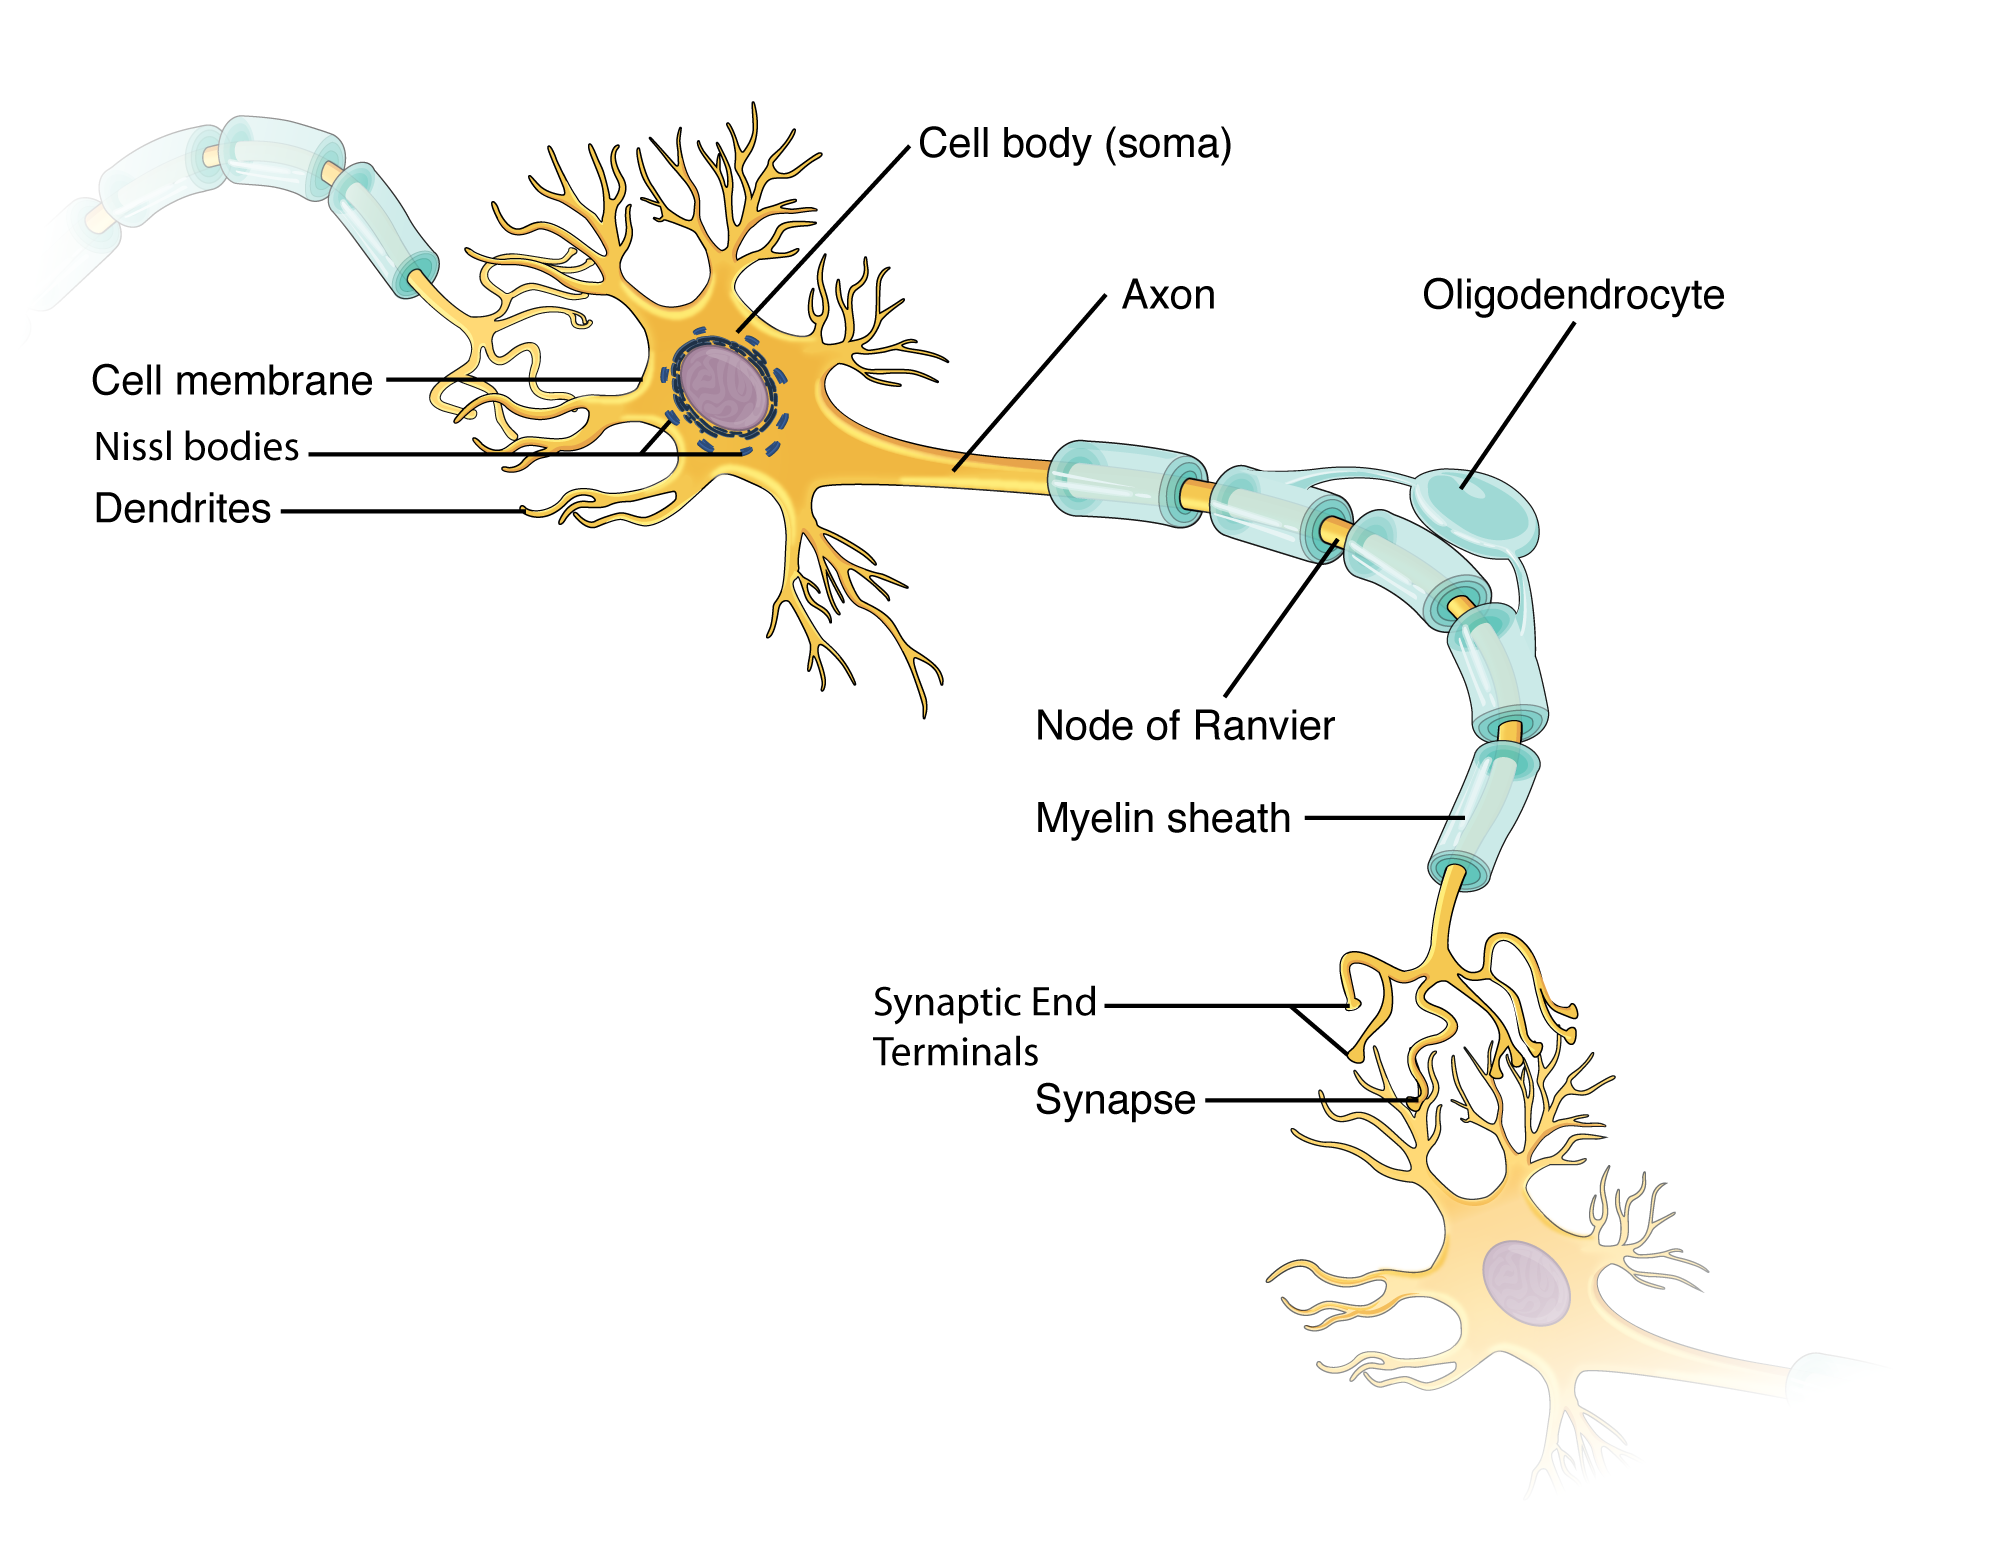 This illustration shows the anatomy of a neuron. The neuron has a very irregular cell body (soma) containing a purple nucleus. There are six projections protruding from the top, bottom and left side of the cell body. Each of the projections branches many times, forming small, tree-shaped structures protruding from the cell body. The right side of the cell body tapers into a long cord called the axon. The axon is insulated by segments of myelin sheath, which resemble a semitransparent toilet paper roll wound around the axon. The myelin sheath is not continuous, but is separated into equally spaced segments. The bare axon segments between the sheath segments are called nodes of Ranvier. An oligodendrocyte is reaching its two arm like projections onto two myelin sheath segments. The axon branches many times at its end, where it connects to the dendrites of another neuron. Each connection between an axon branch and a dendrite is called a synapse. The cell membrane completely surrounds the cell body, dendrites, and its axon. The axon of another nerve is seen in the upper left of the diagram connecting with the dendrites of the central neuron.